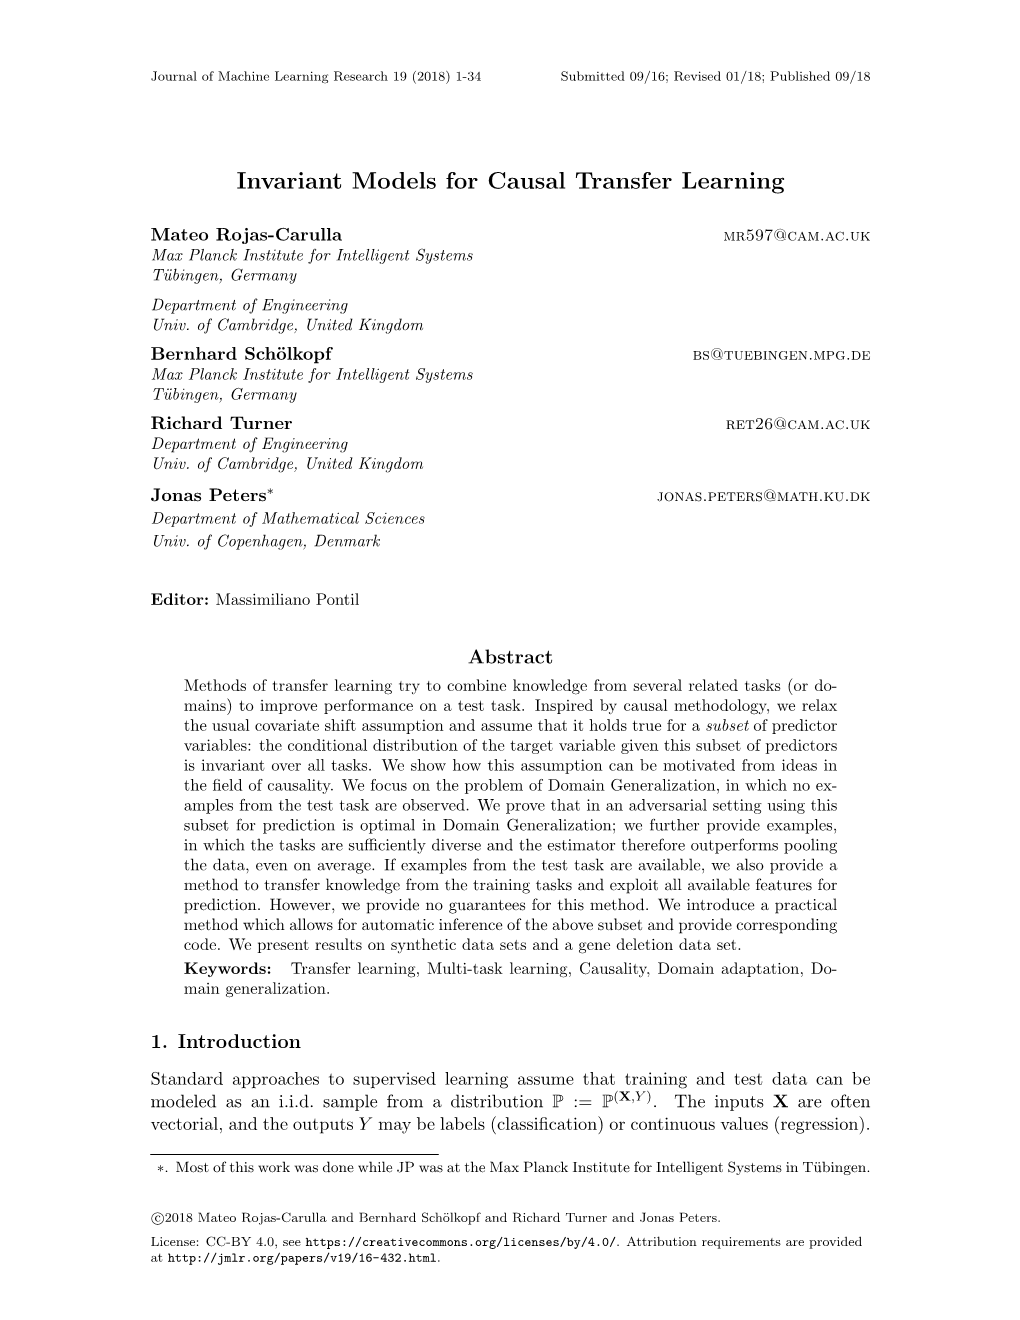 Invariant Models for Causal Transfer Learning